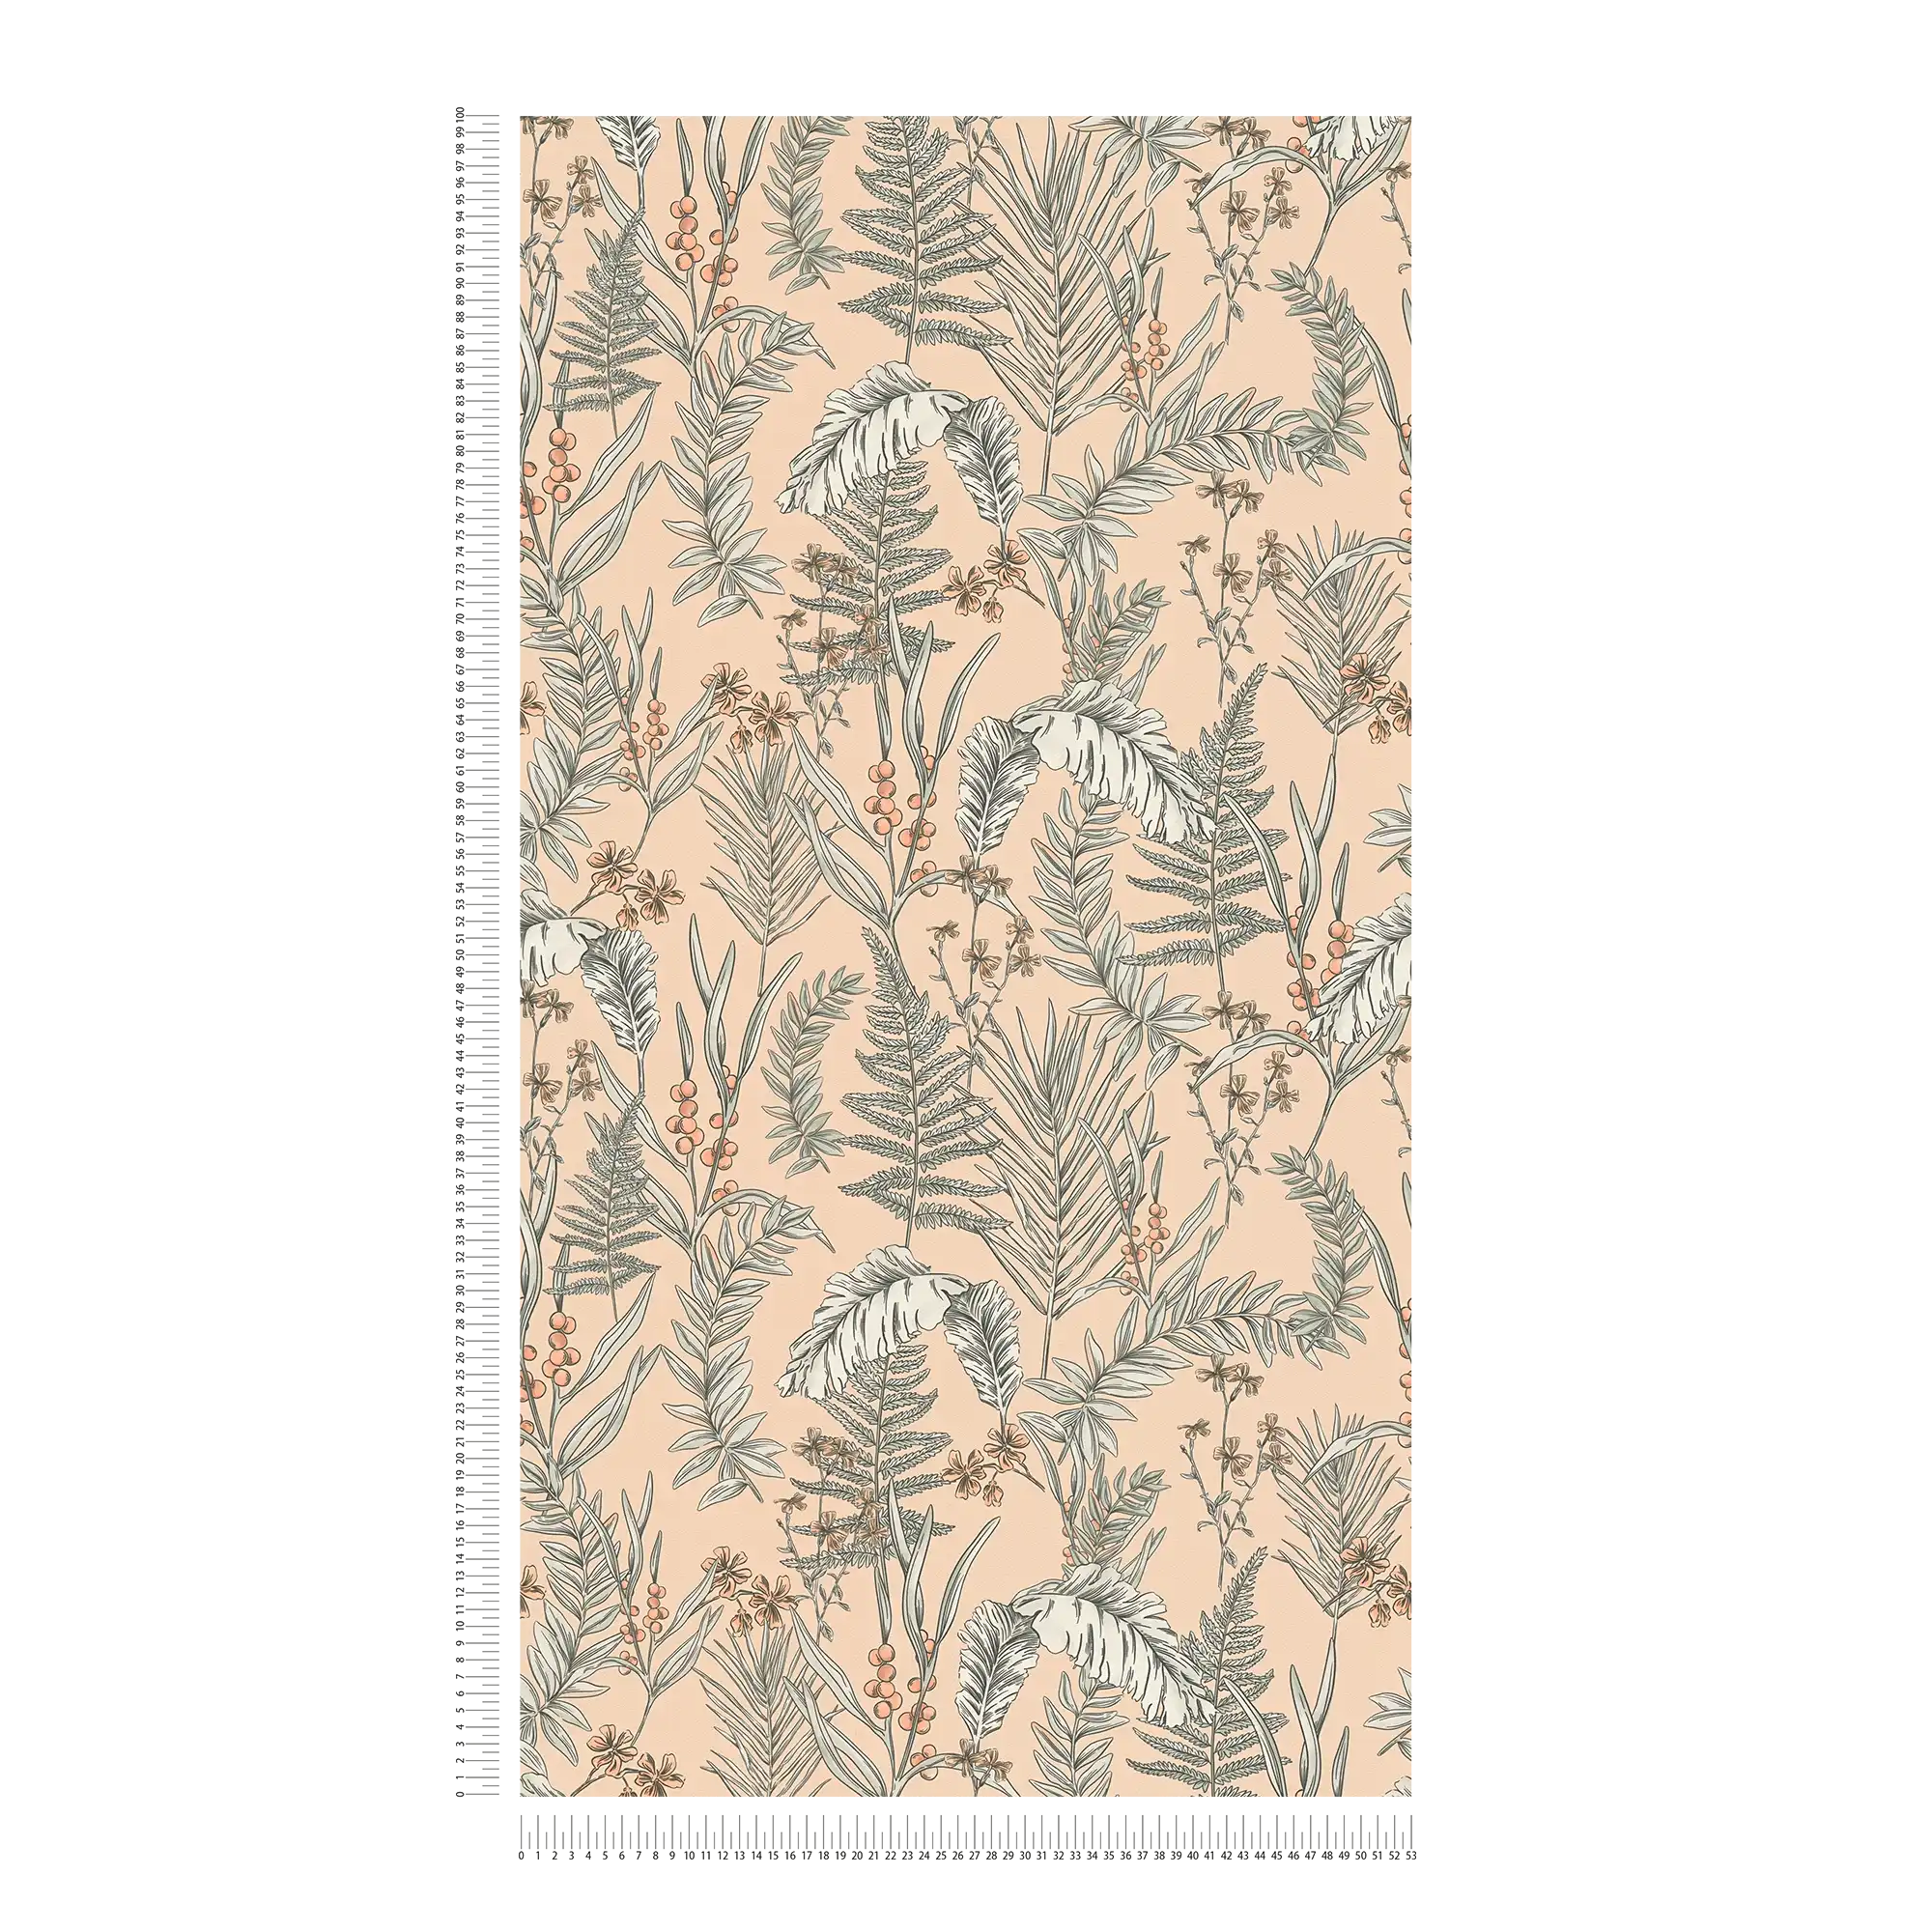             Modern wallpaper floral with flowers & leaves textured - pink, beige, white
        